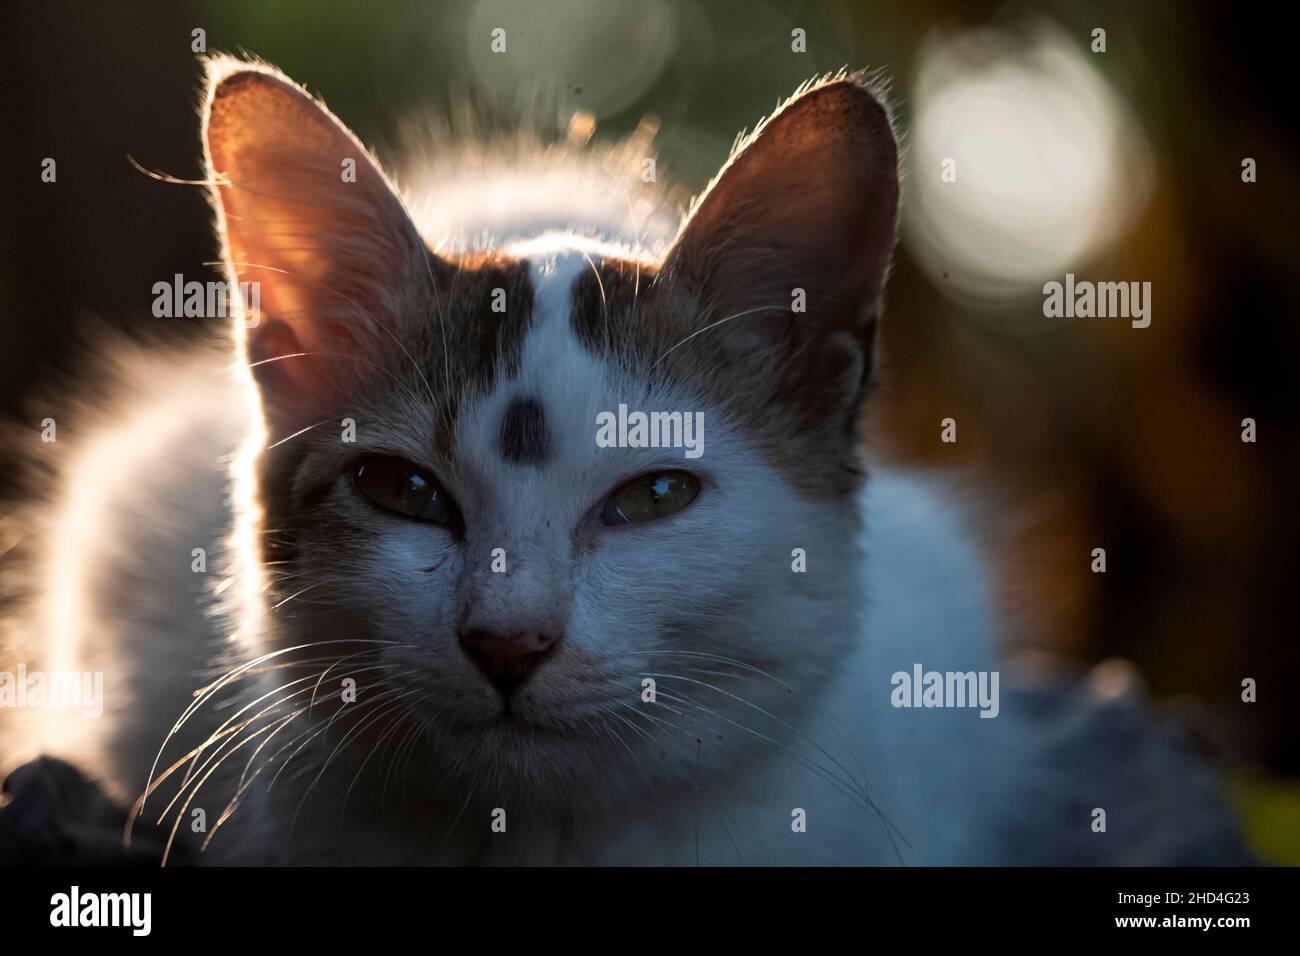 Cute baby cat face close up with beautiful lighting and blurred background Stock Photo